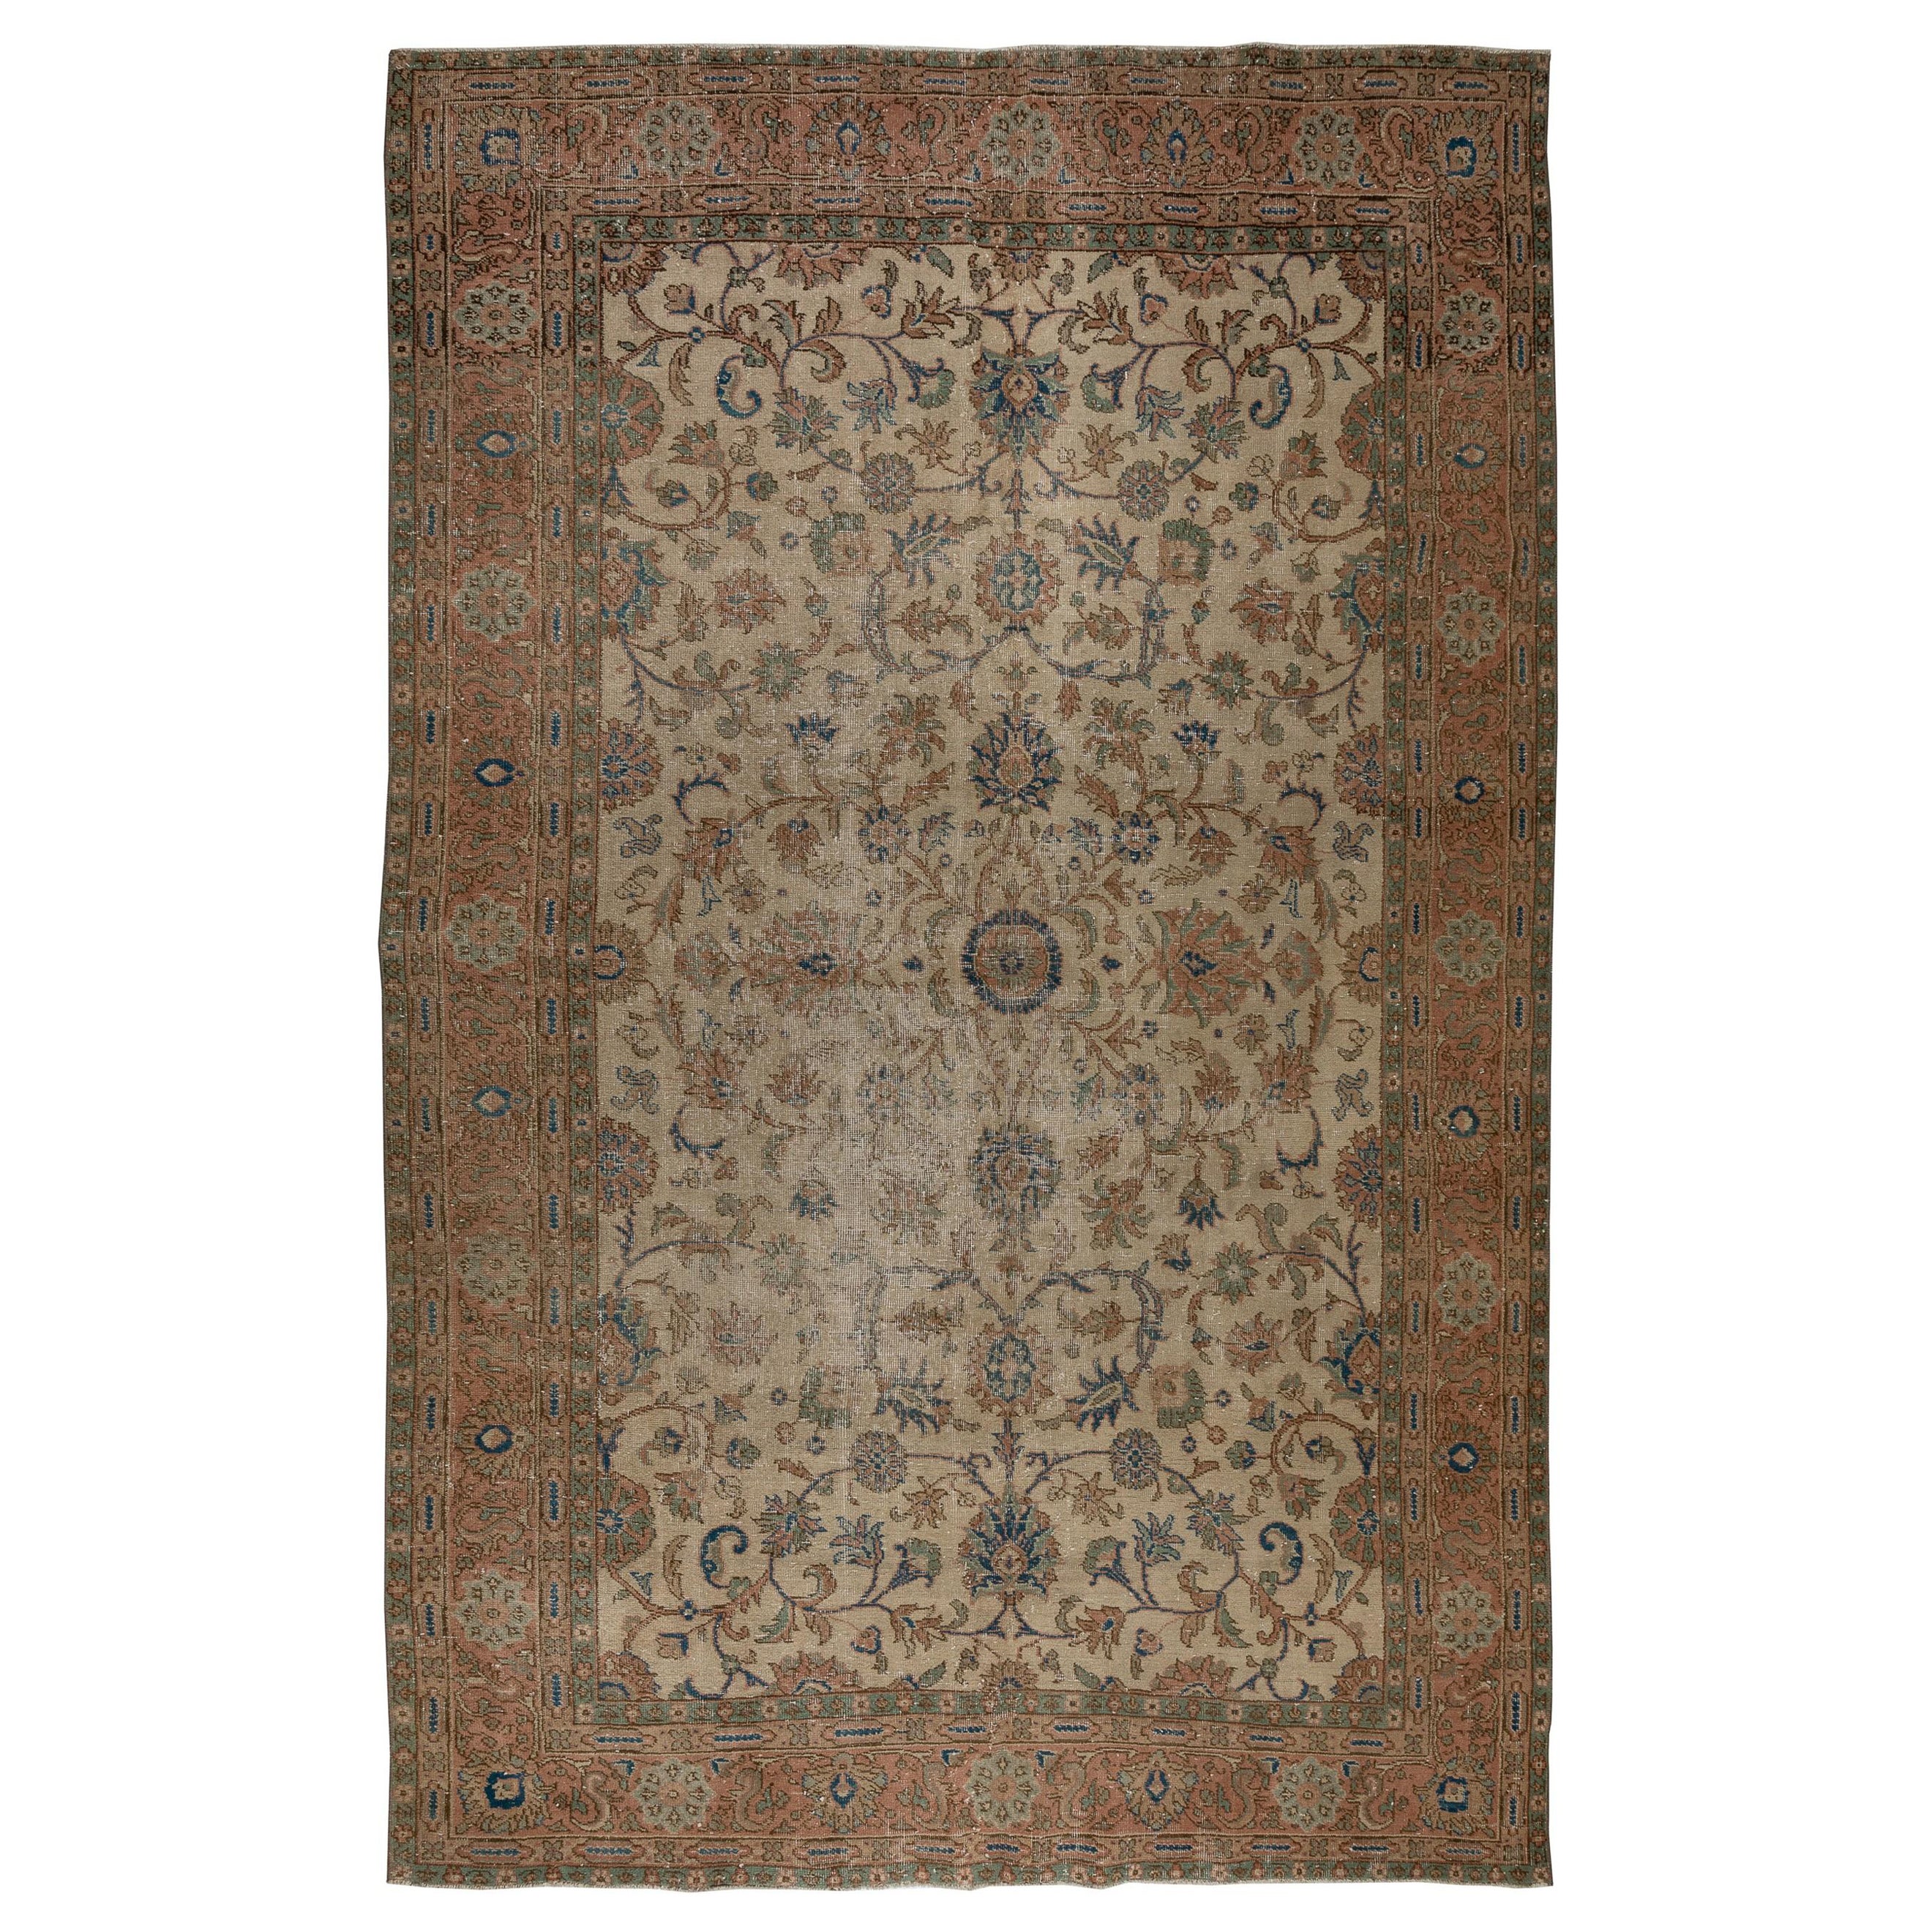 7x10.5 Ft Midcentury Handmade Oushak Area Rug in Beige with Floral Design For Sale